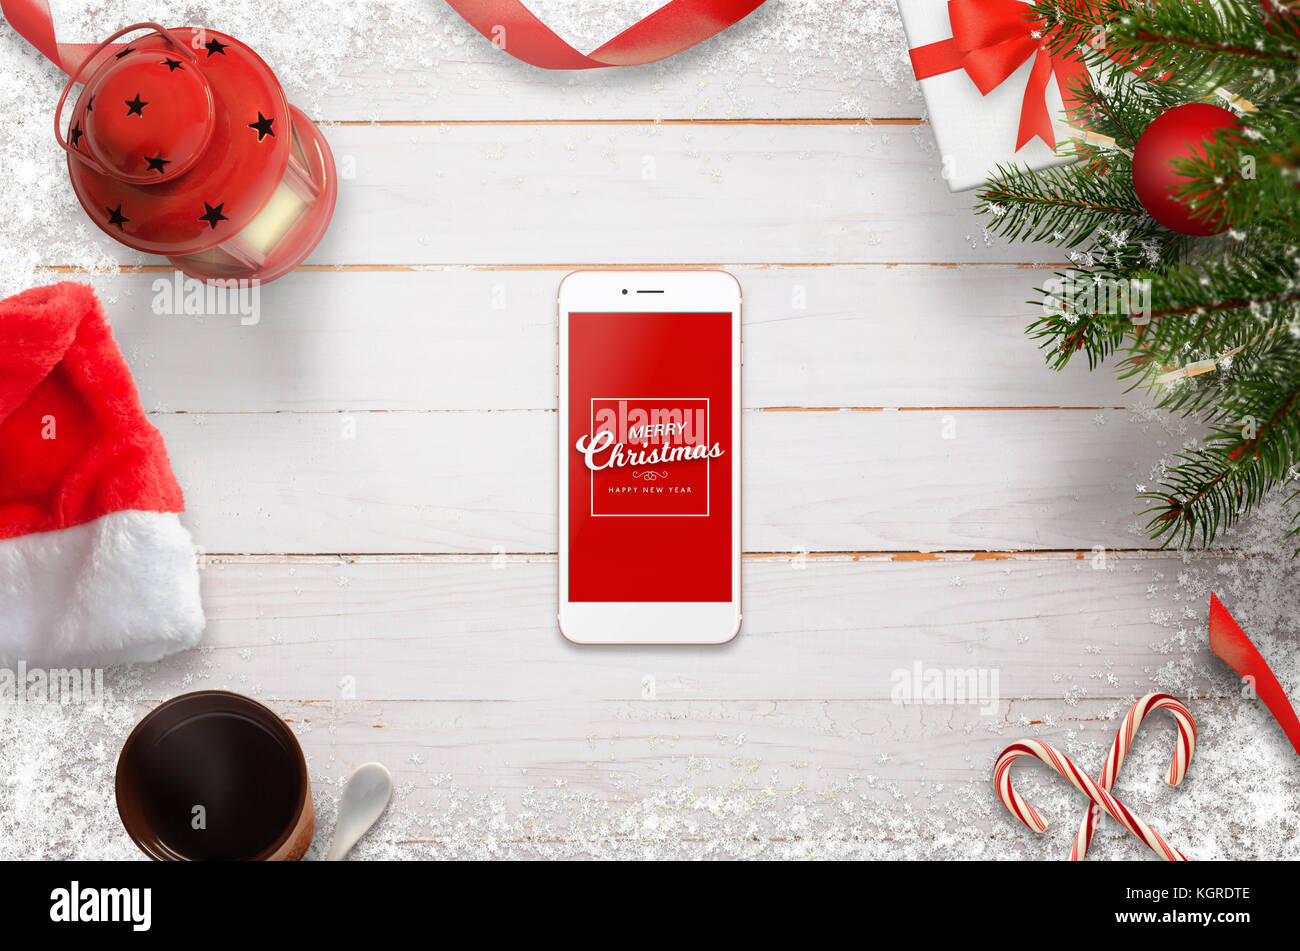 Hero header Christmas scene with mobile phone in the middle with Merry Christmas message. Christmas tree, gifts, decorations on white wooden desk. Stock Photo